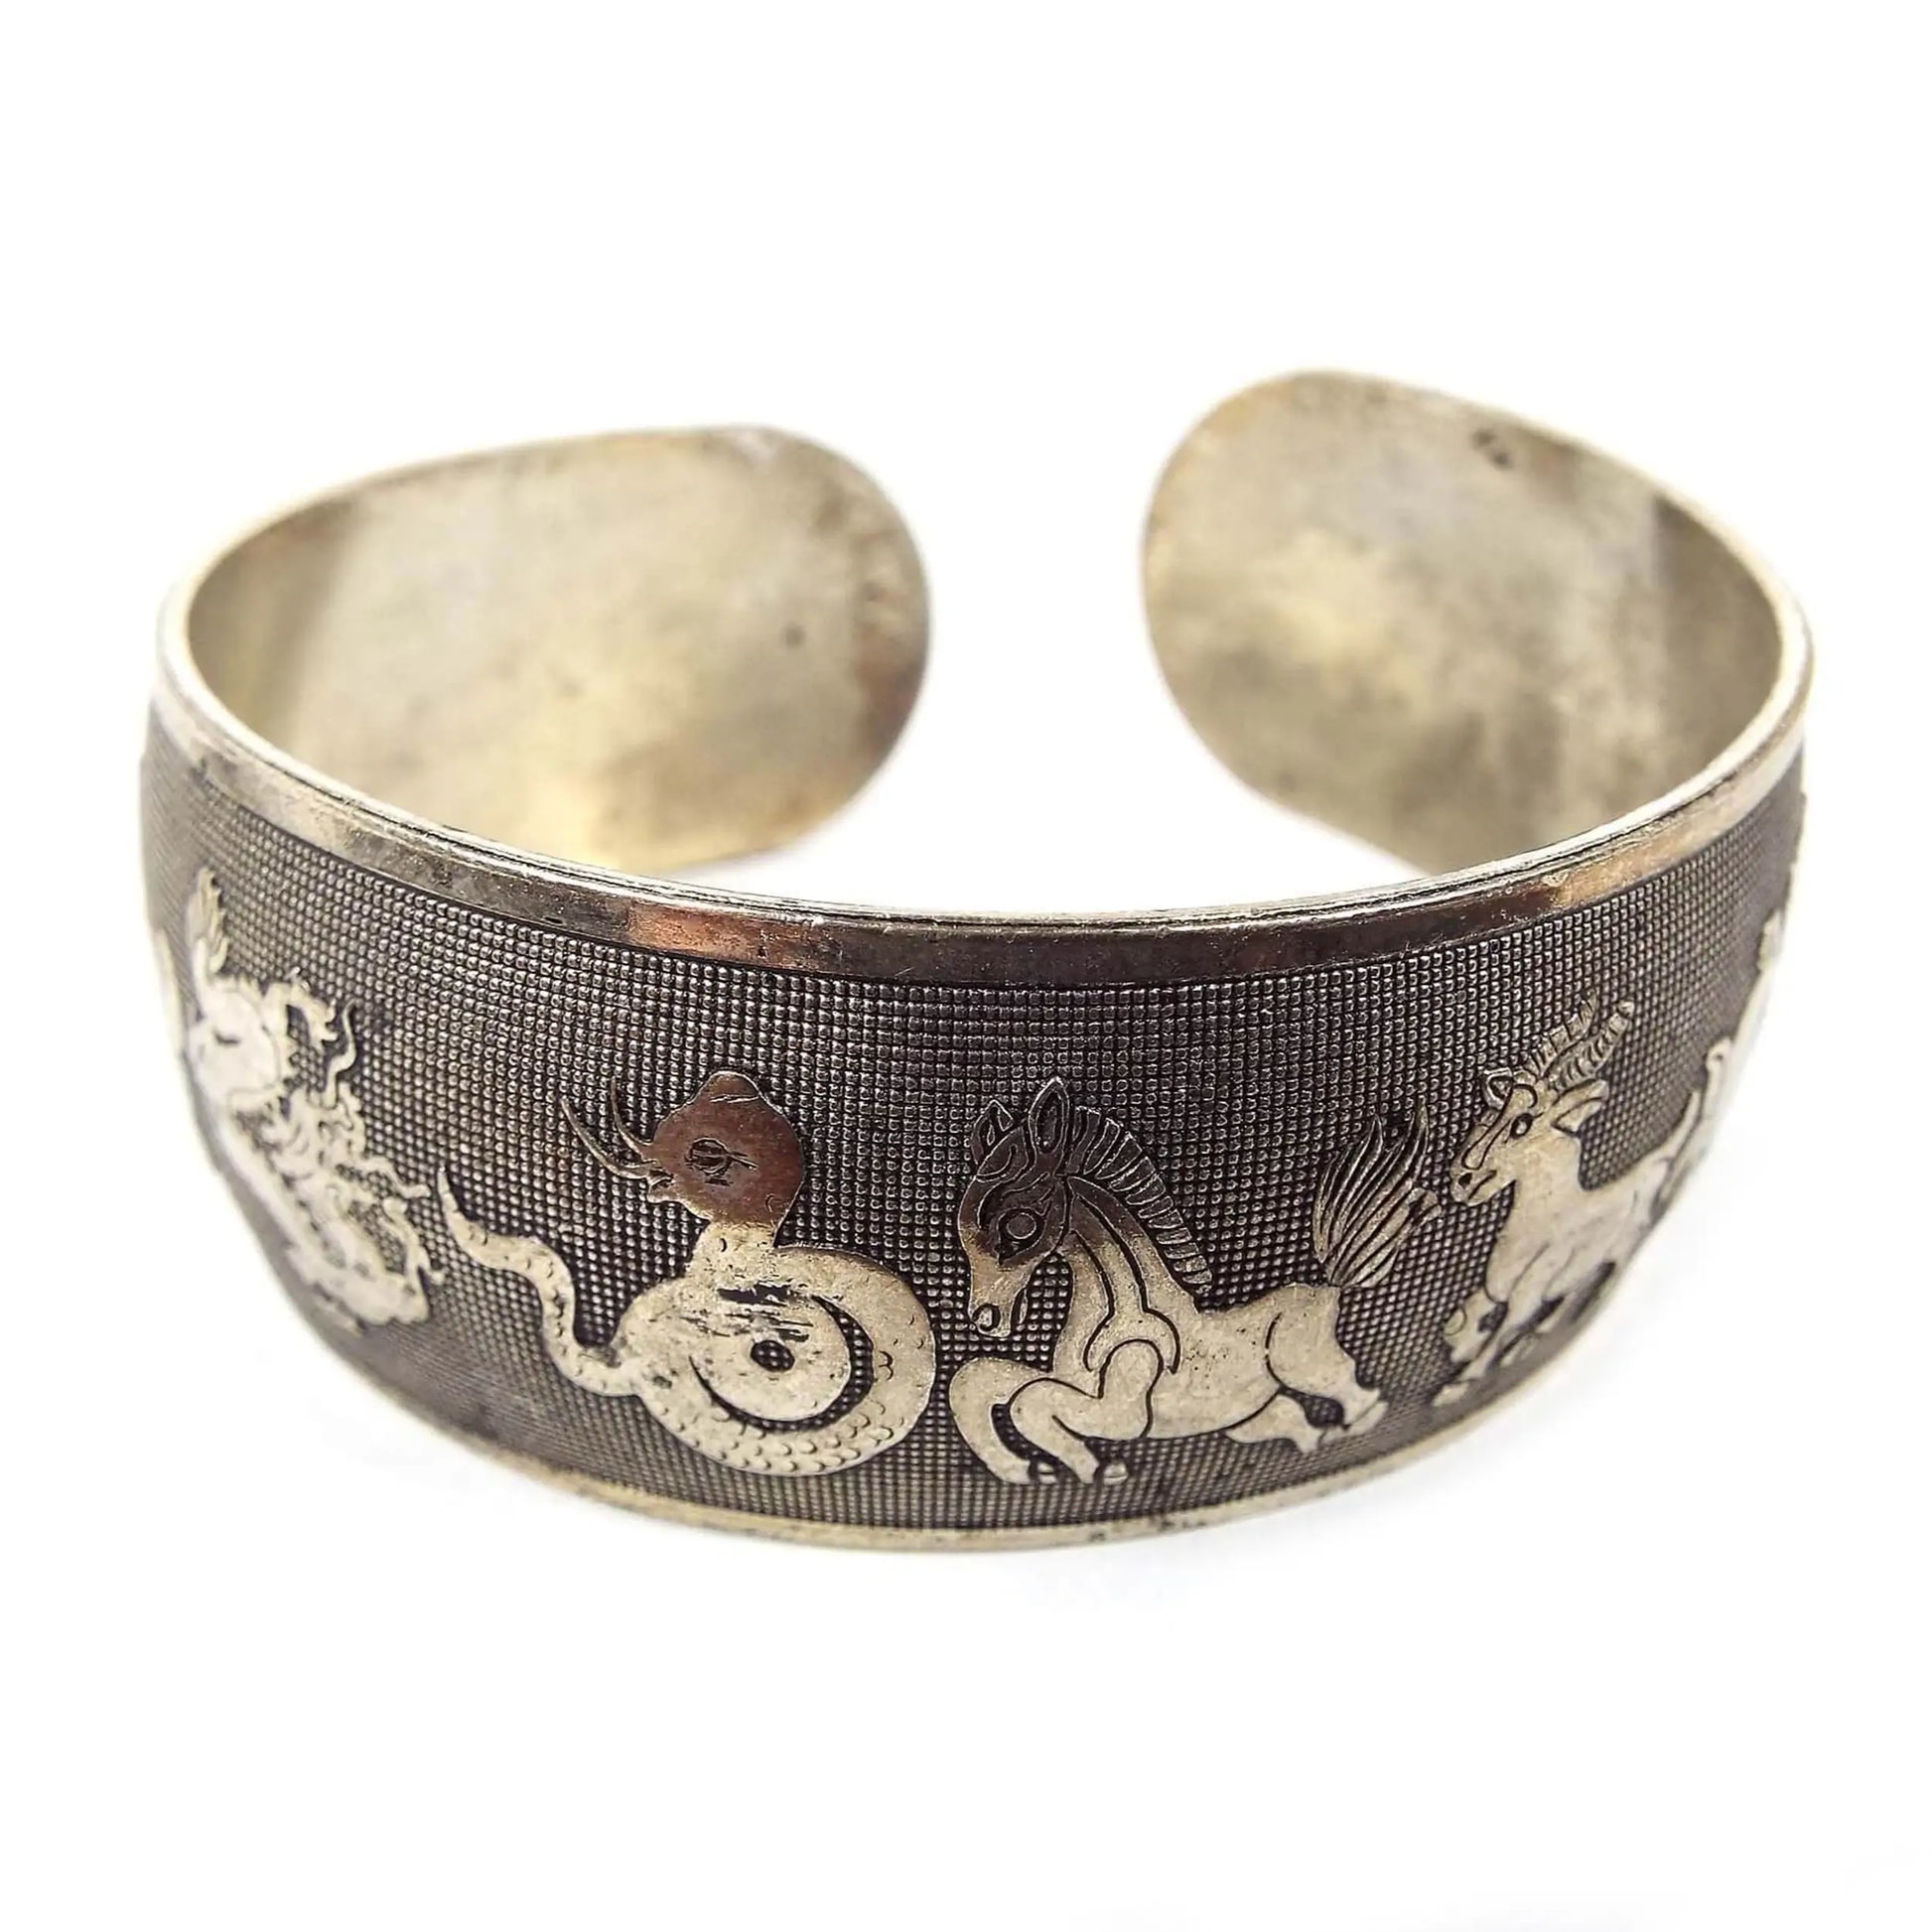 Front view of the retro vintage Chinese zodiac cuff bracelet. It is antiqued silver tone in color and has depictions of the Chinese Zodiacs across the outside edge.